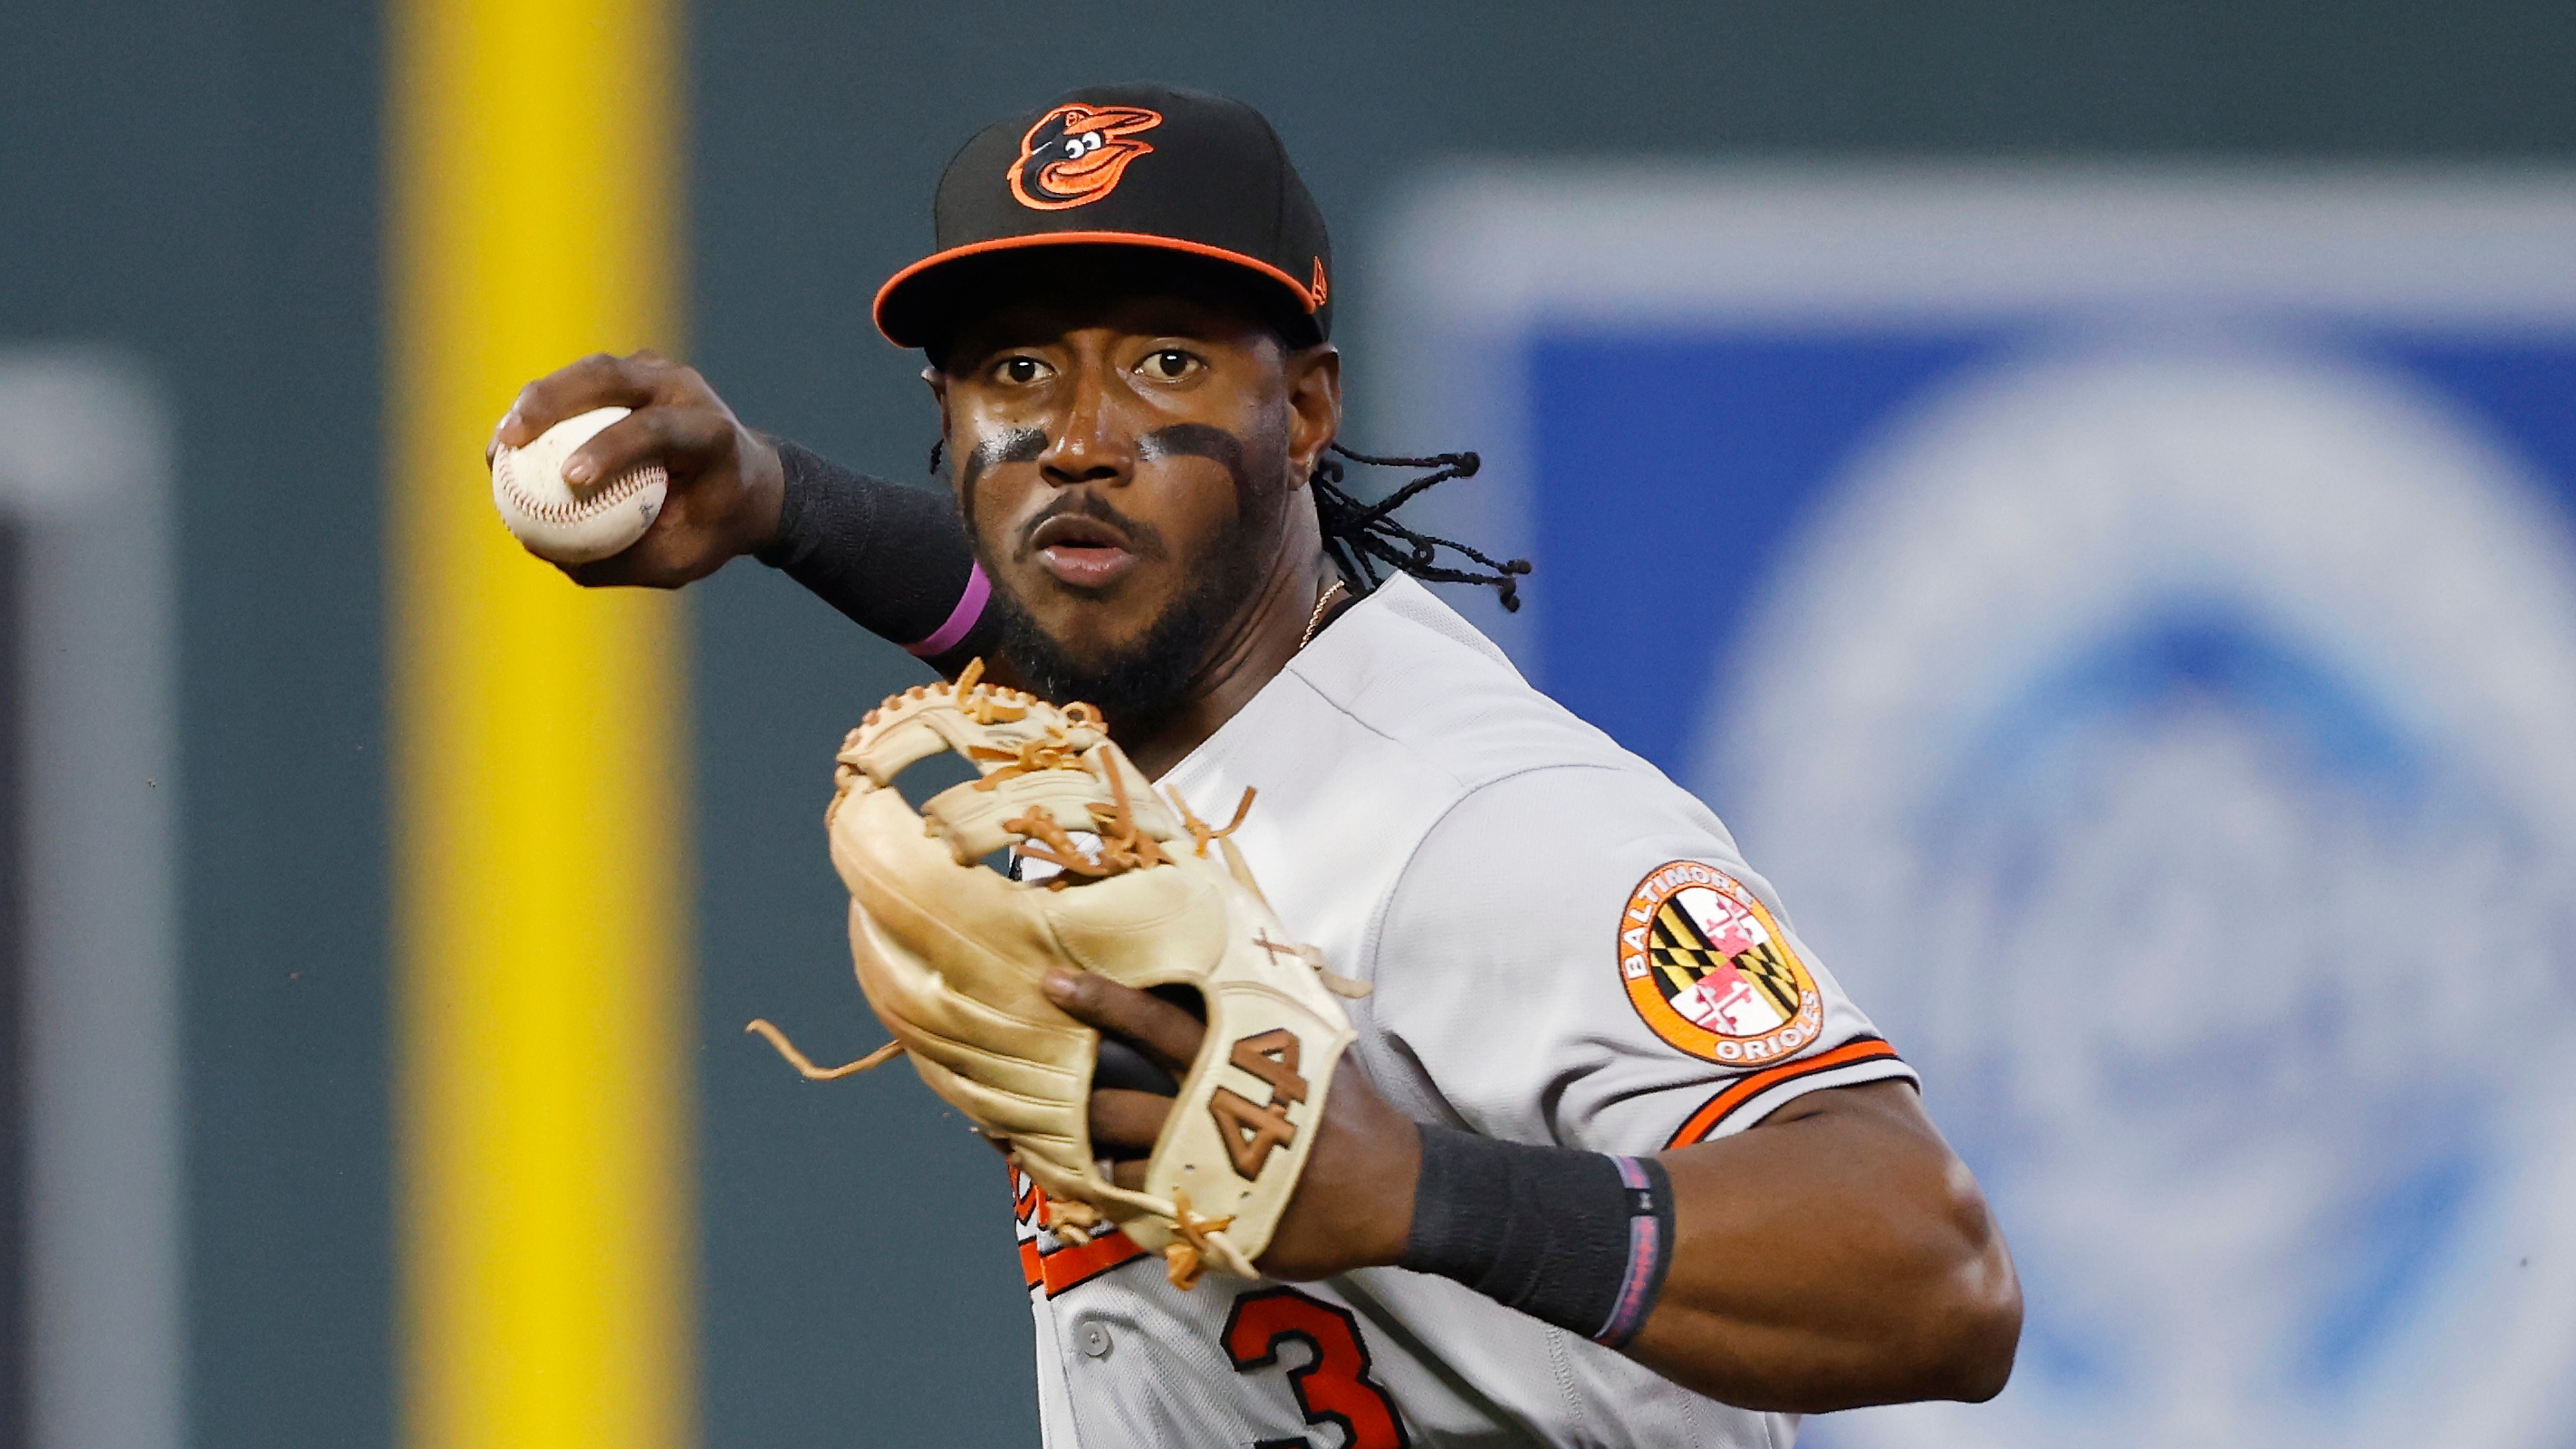 Orioles on MASN on X: Jorge Mateo has been making a strong case to be the  O's shortstop of the future. He's played as well defensively this year at  shortstop as anybody